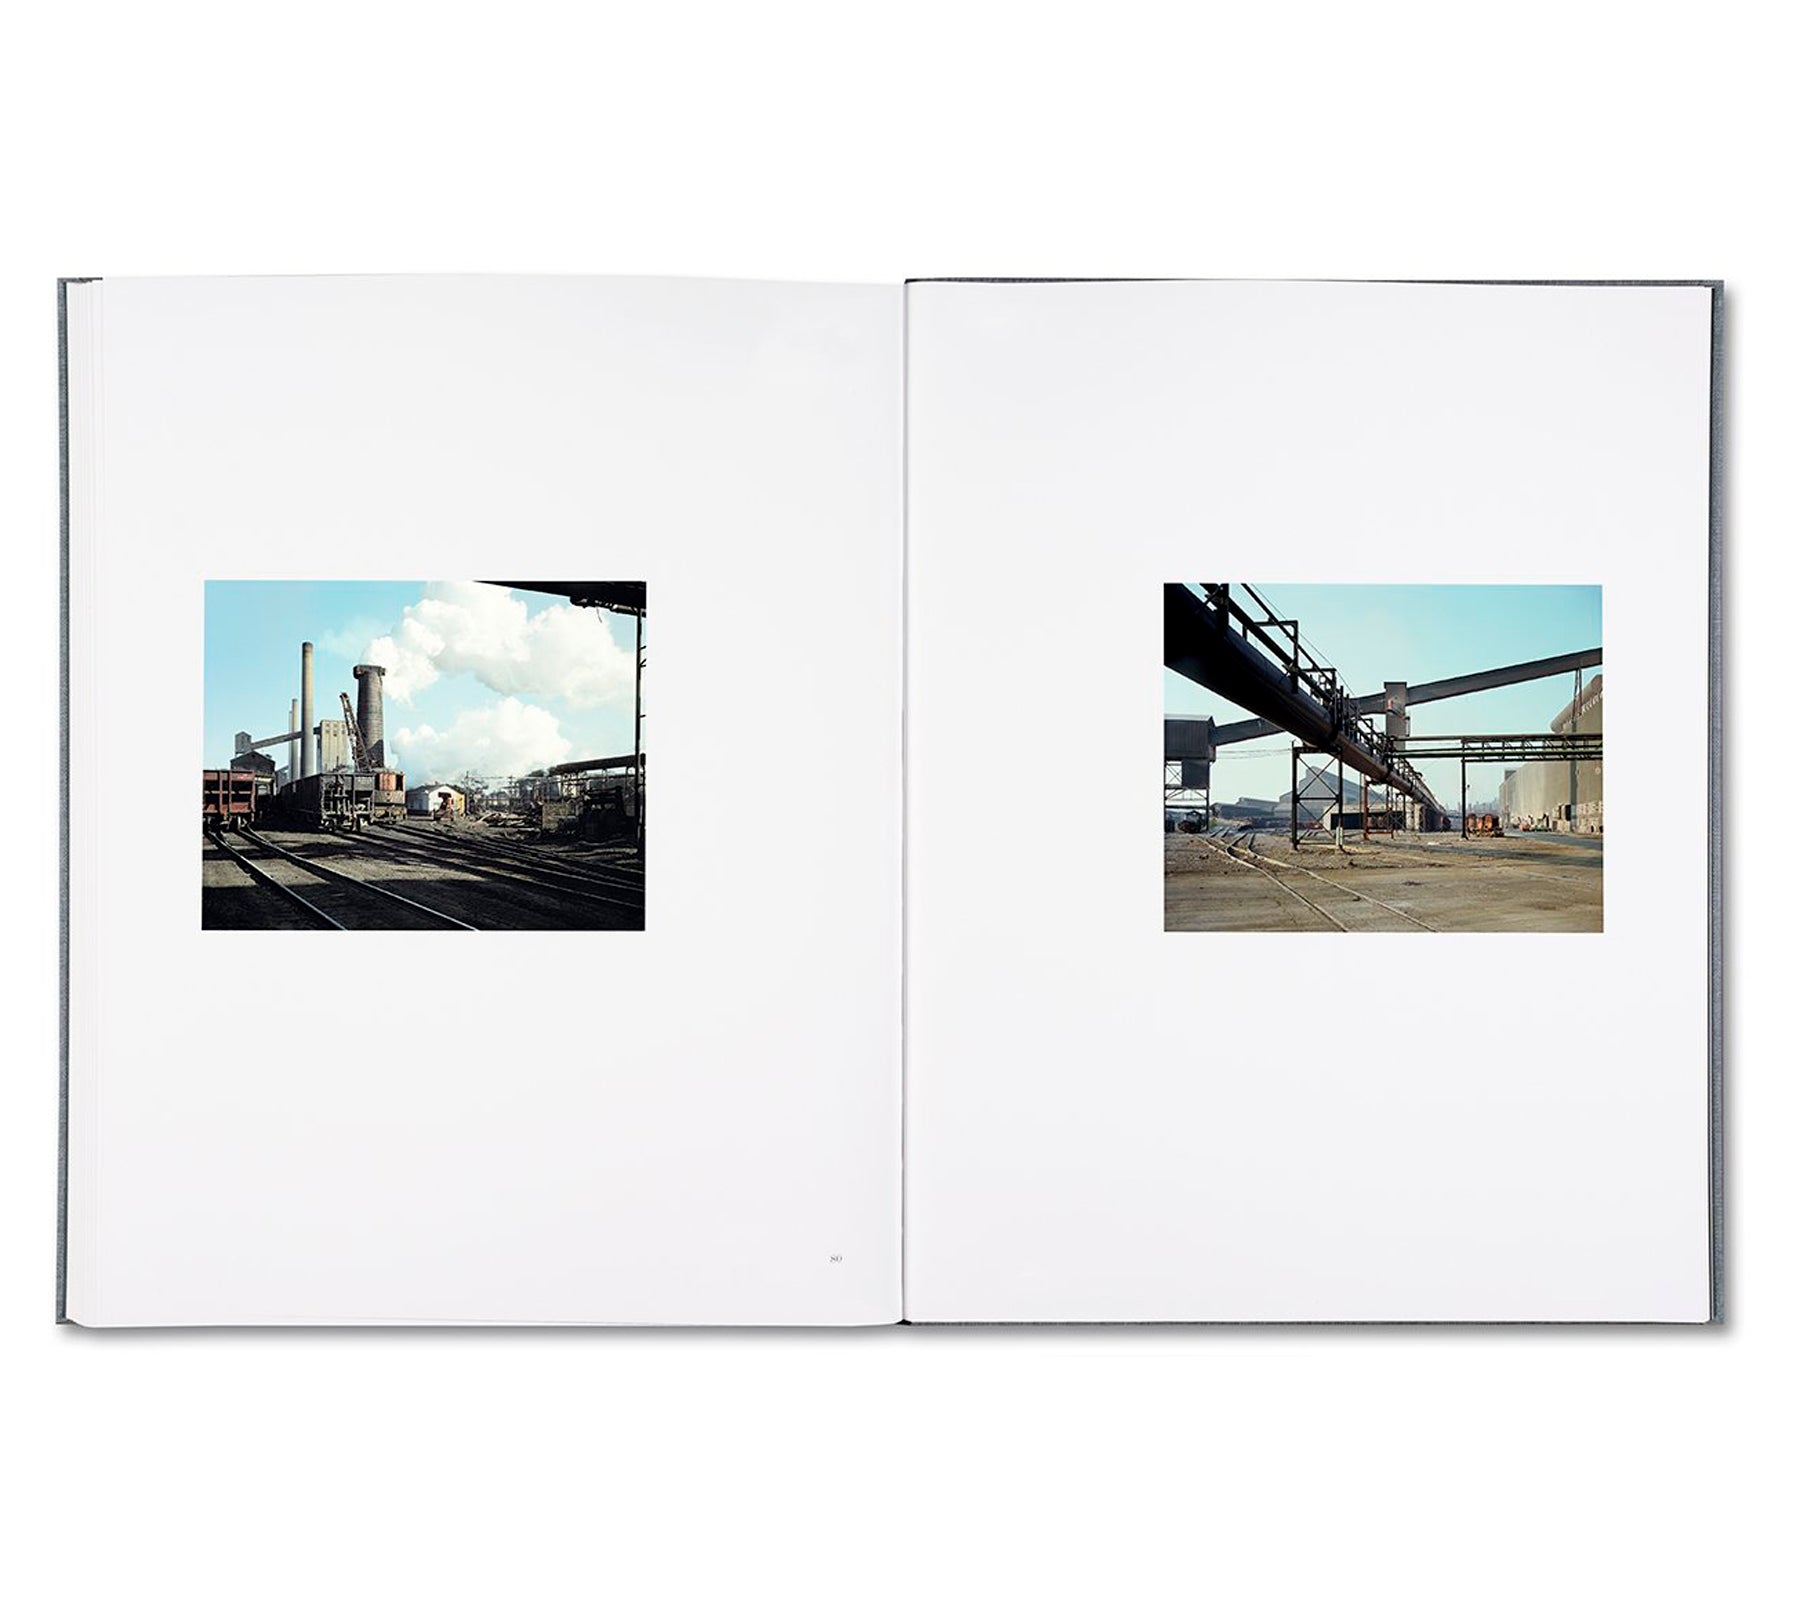 STEEL TOWN by Stephen Shore [SIGNED]